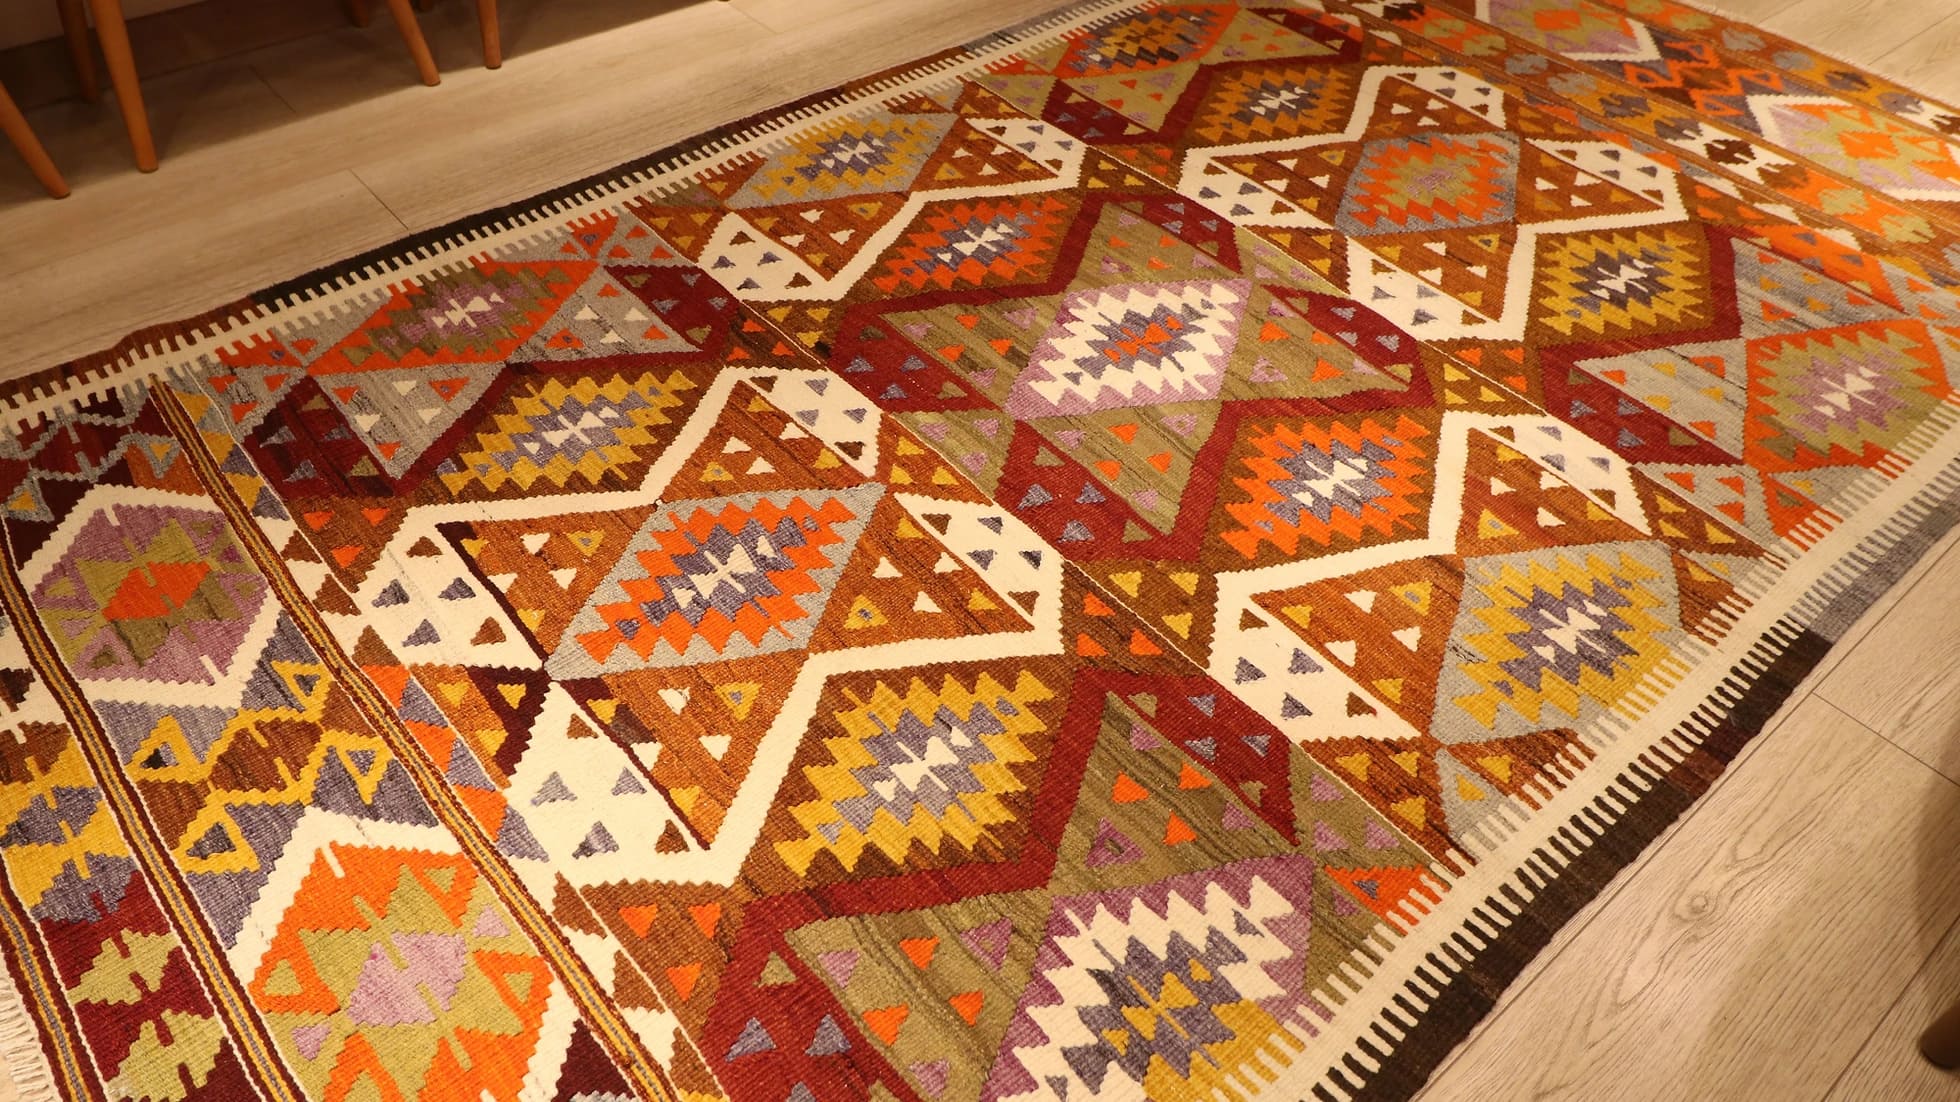 1950s handwoven Turkish flat-weave rug in terracotta, orange, cream, yellow, purple for living room, kitchen, office, dining room, and bedroom